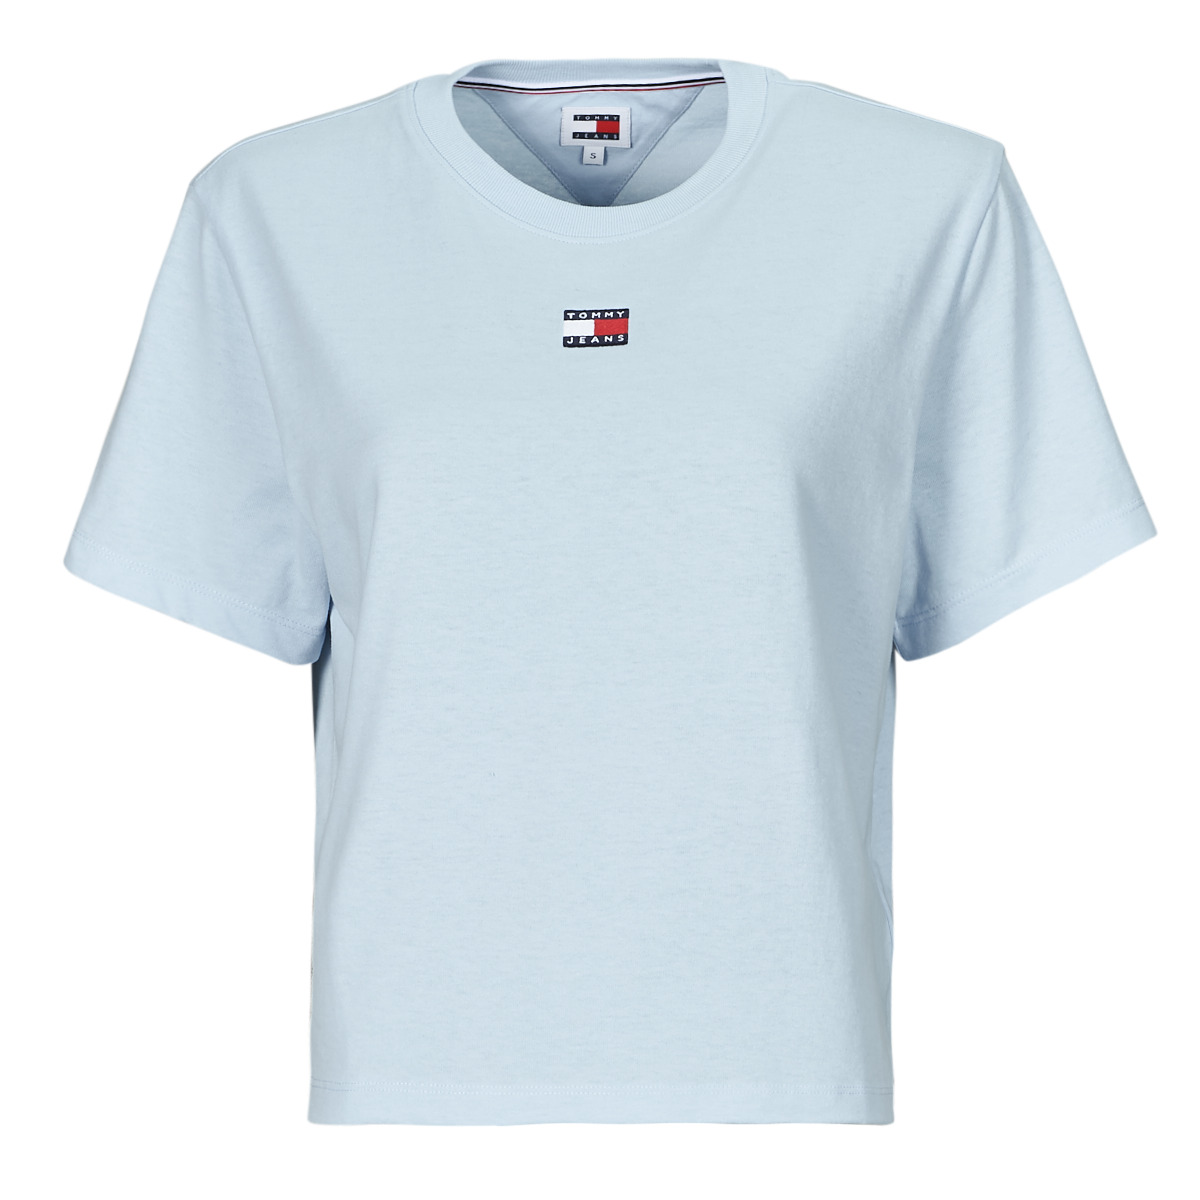 Tommy Jeans TJW BXY TEE t-shirts | EXT NET - BADGE delivery Free ! Blue Clothing - short-sleeved Women Spartoo